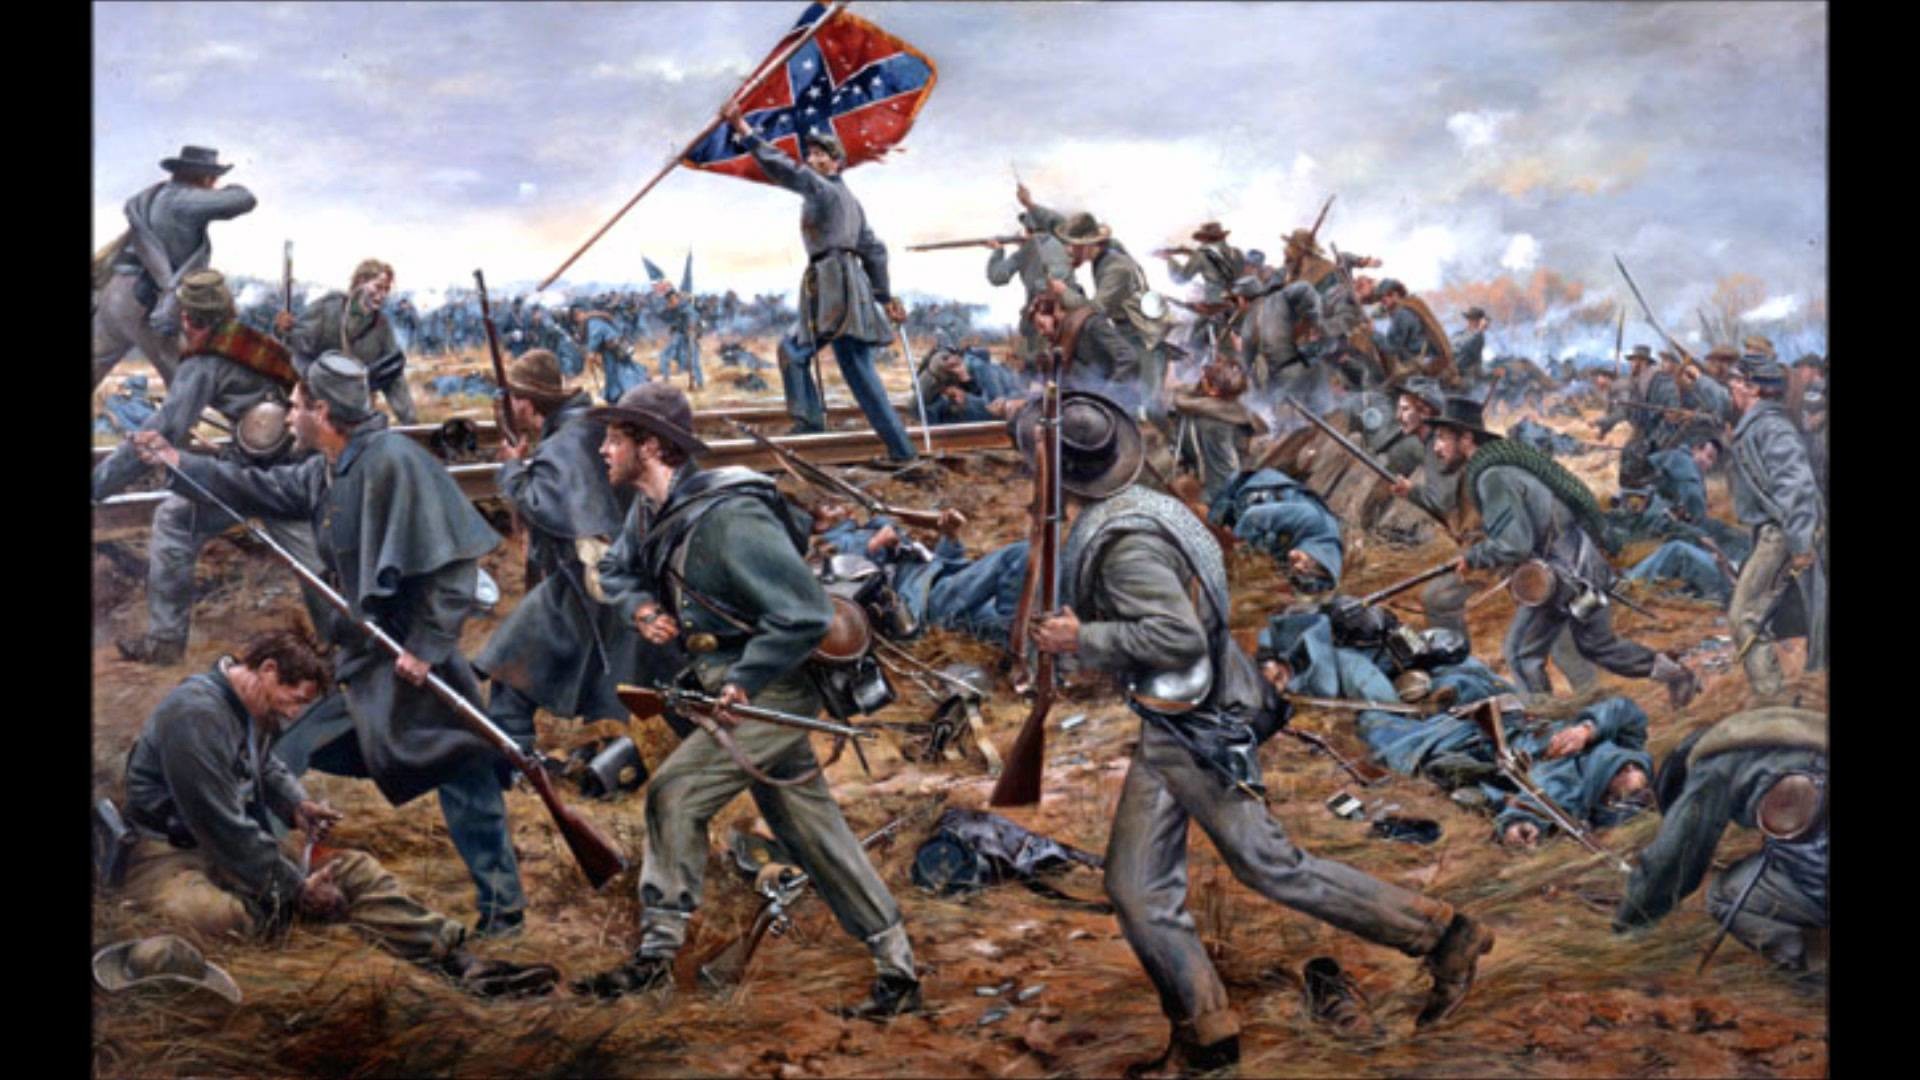 1920x1080 12 2015 By Stephen Comments Off on American Civil War Wallpapers 